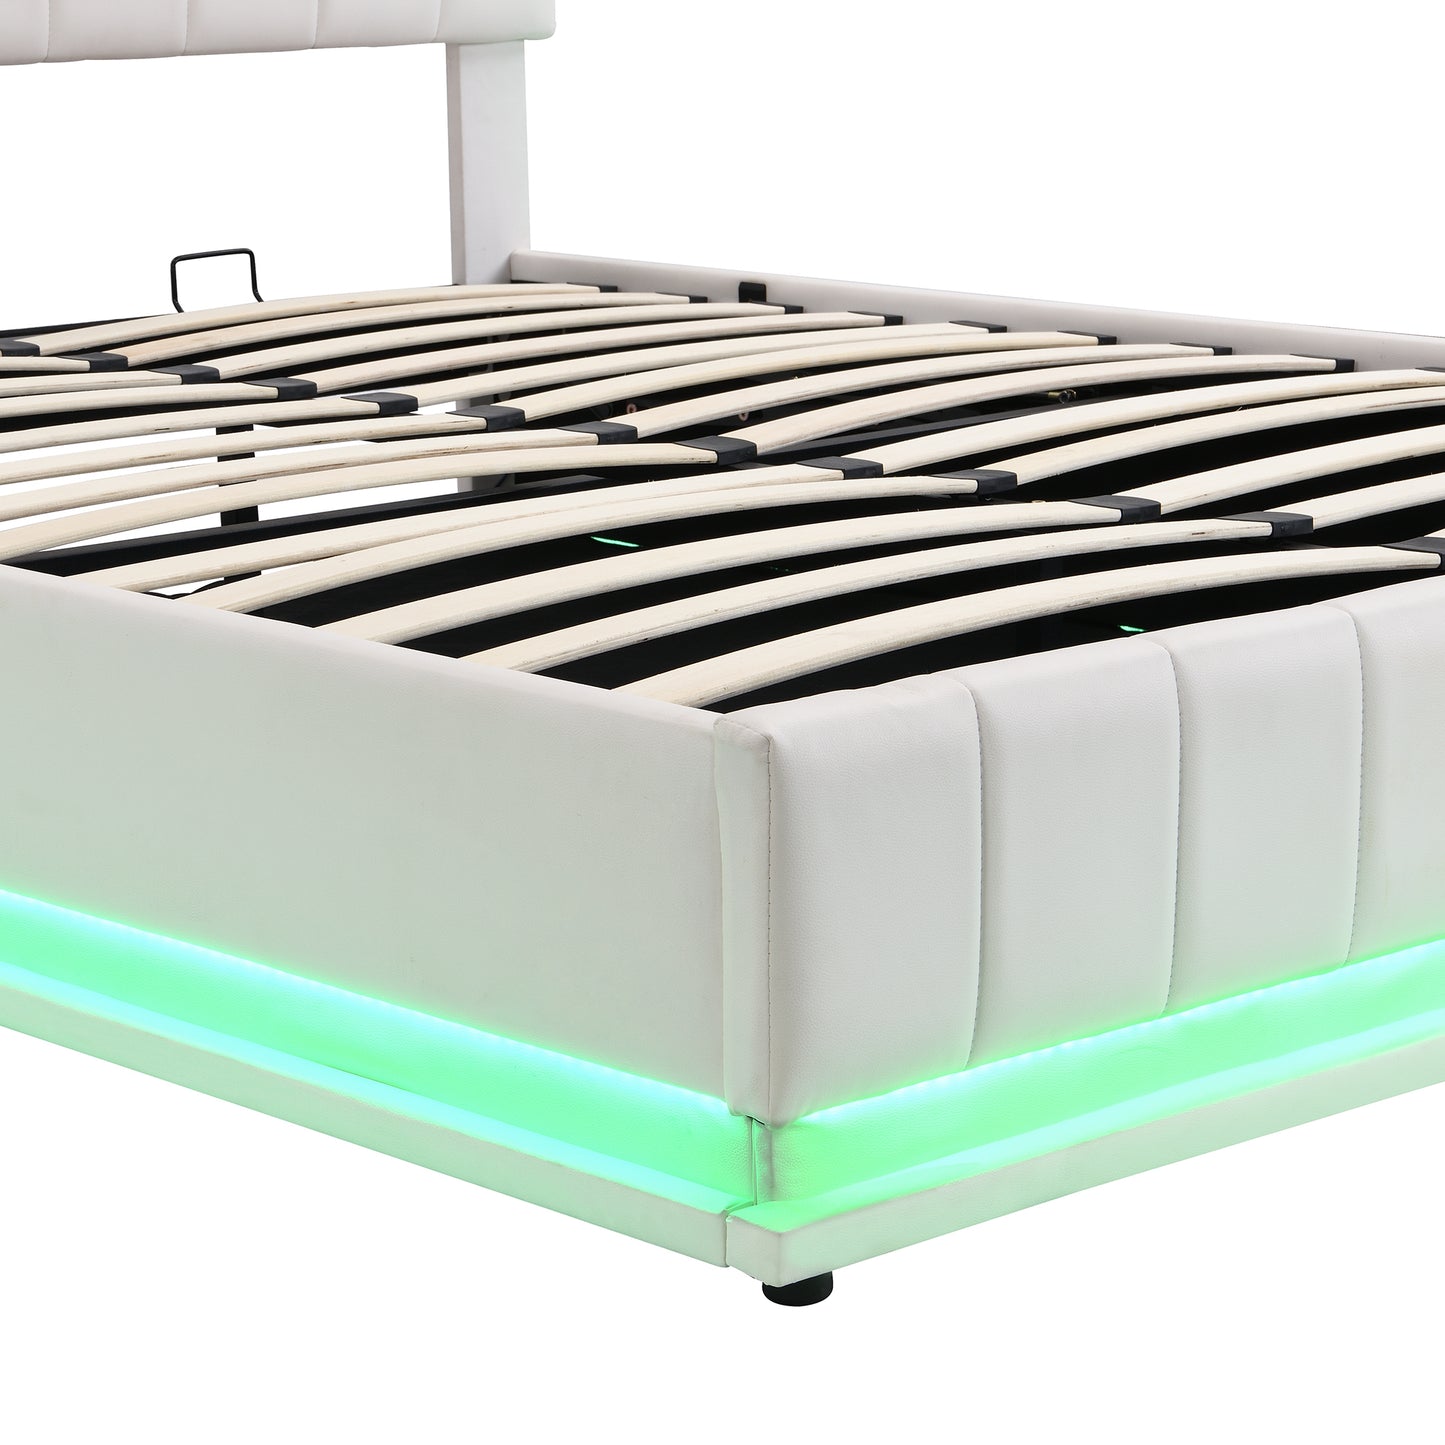 Queen Size Upholstered Bed with Hydraulic Storage System and LED Light, Modern Platform Bed with Sockets and USB Ports, White